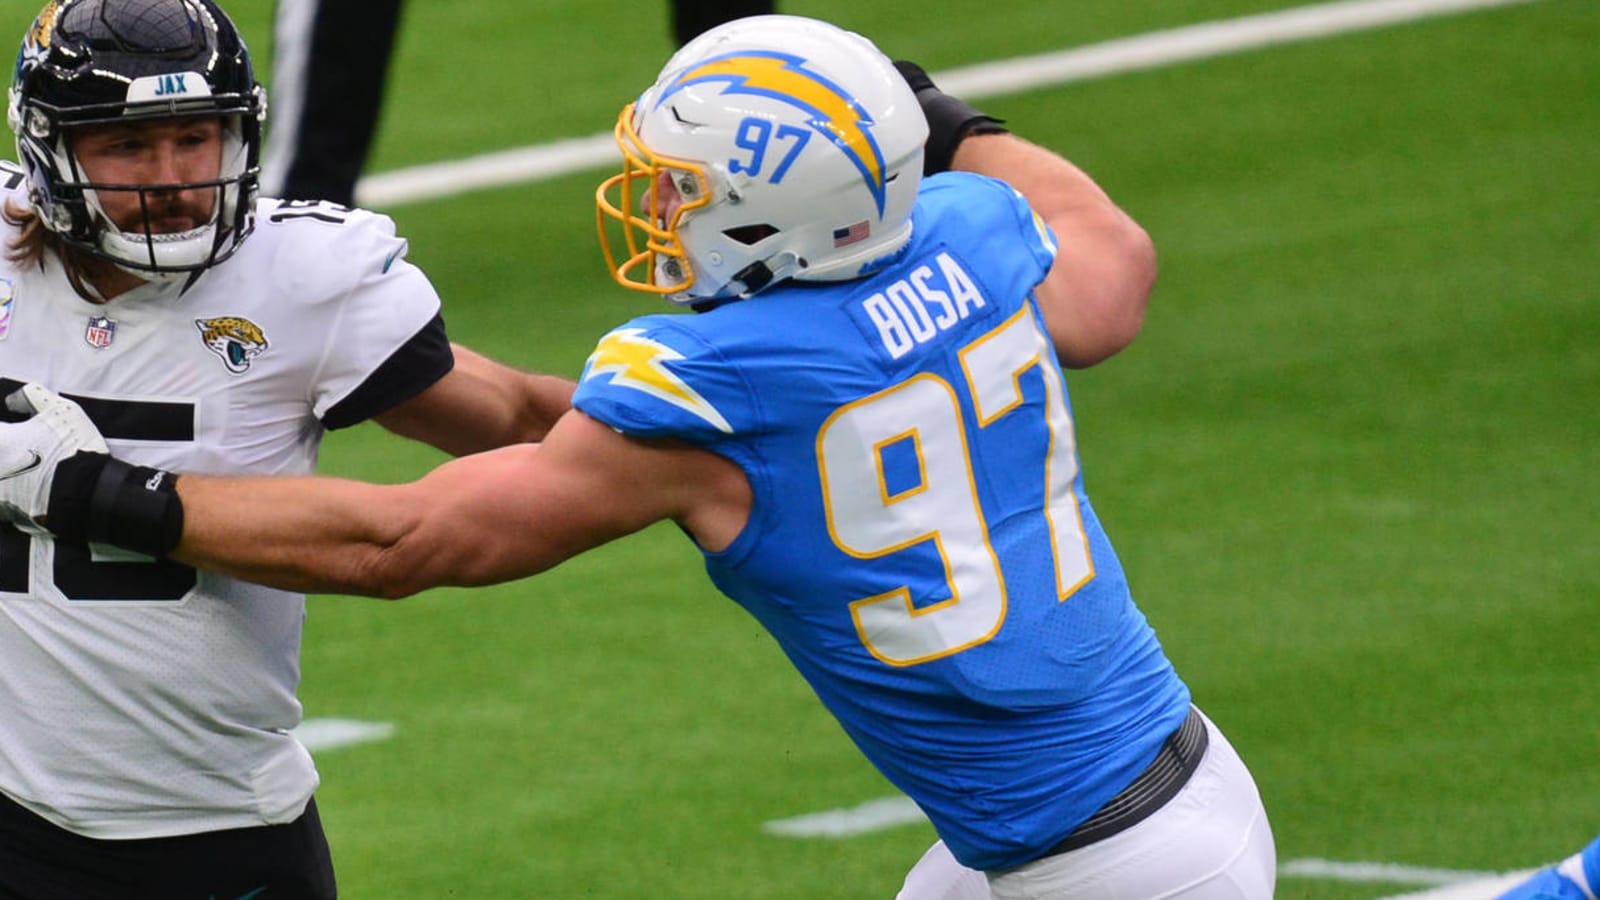 Family tradition: Chargers' Joey Bosa switches to familiar No. 97